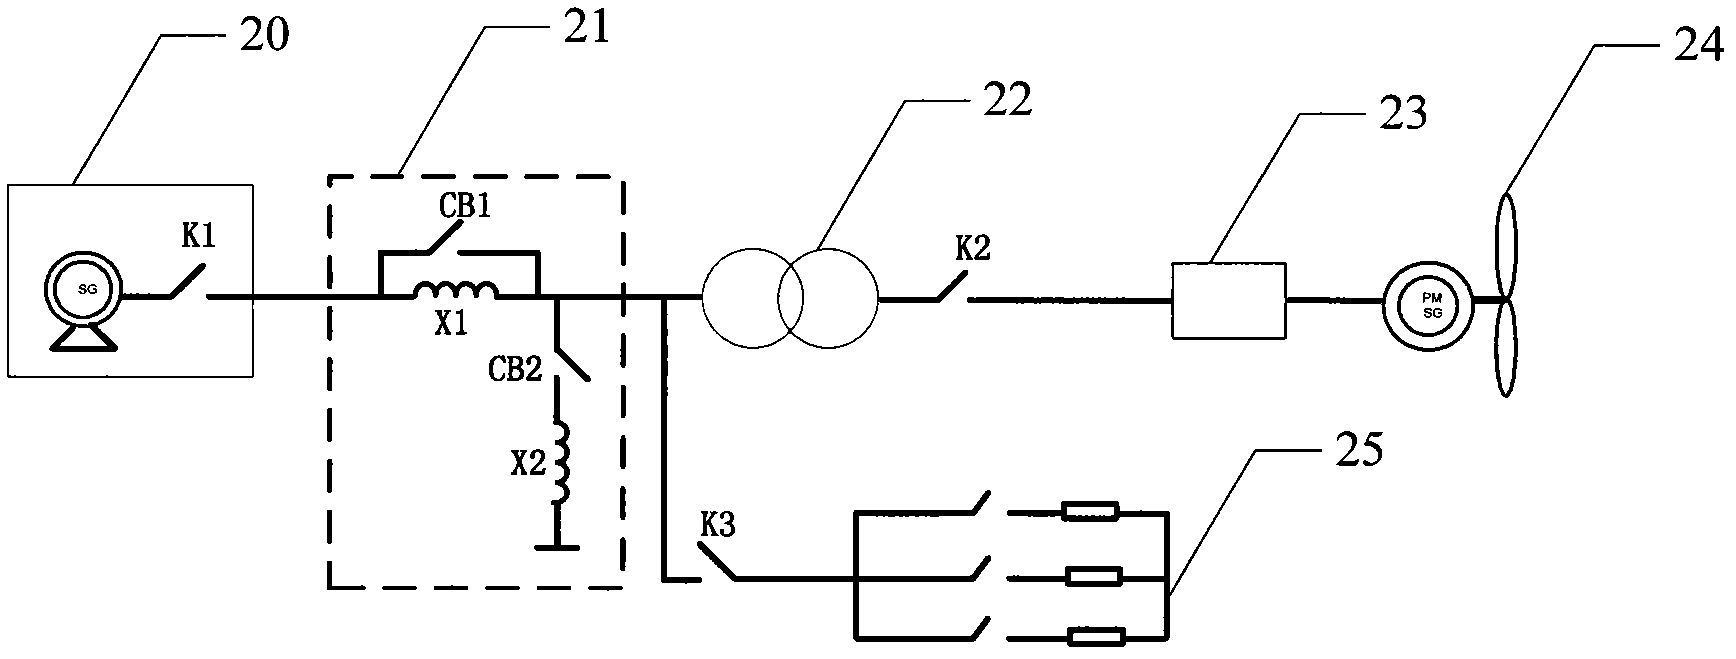 Low-voltage ride through detection system and method of wind generating set